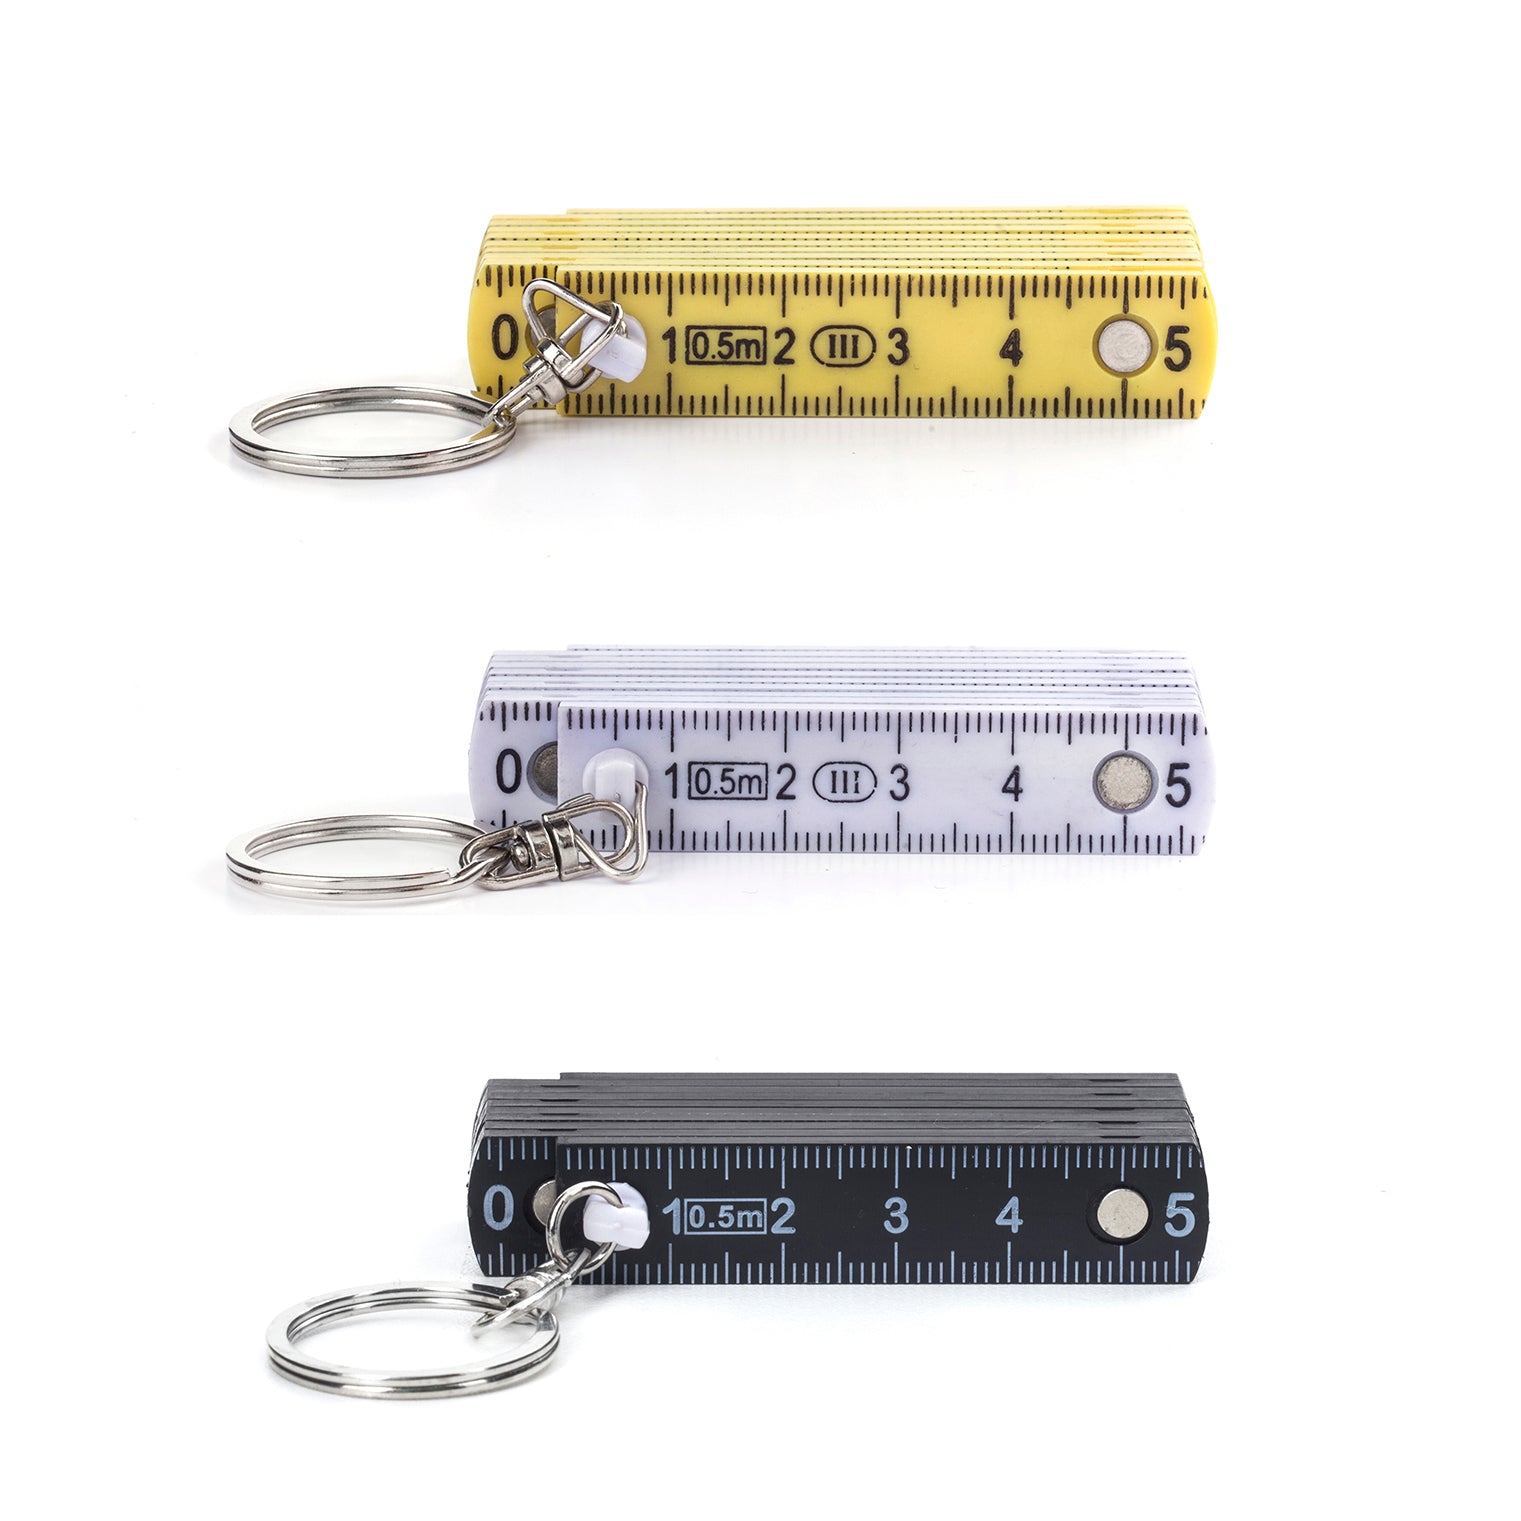 5 Pack Mini Tape Measure Keychain (Assorted Colors) - 3' x 1/4